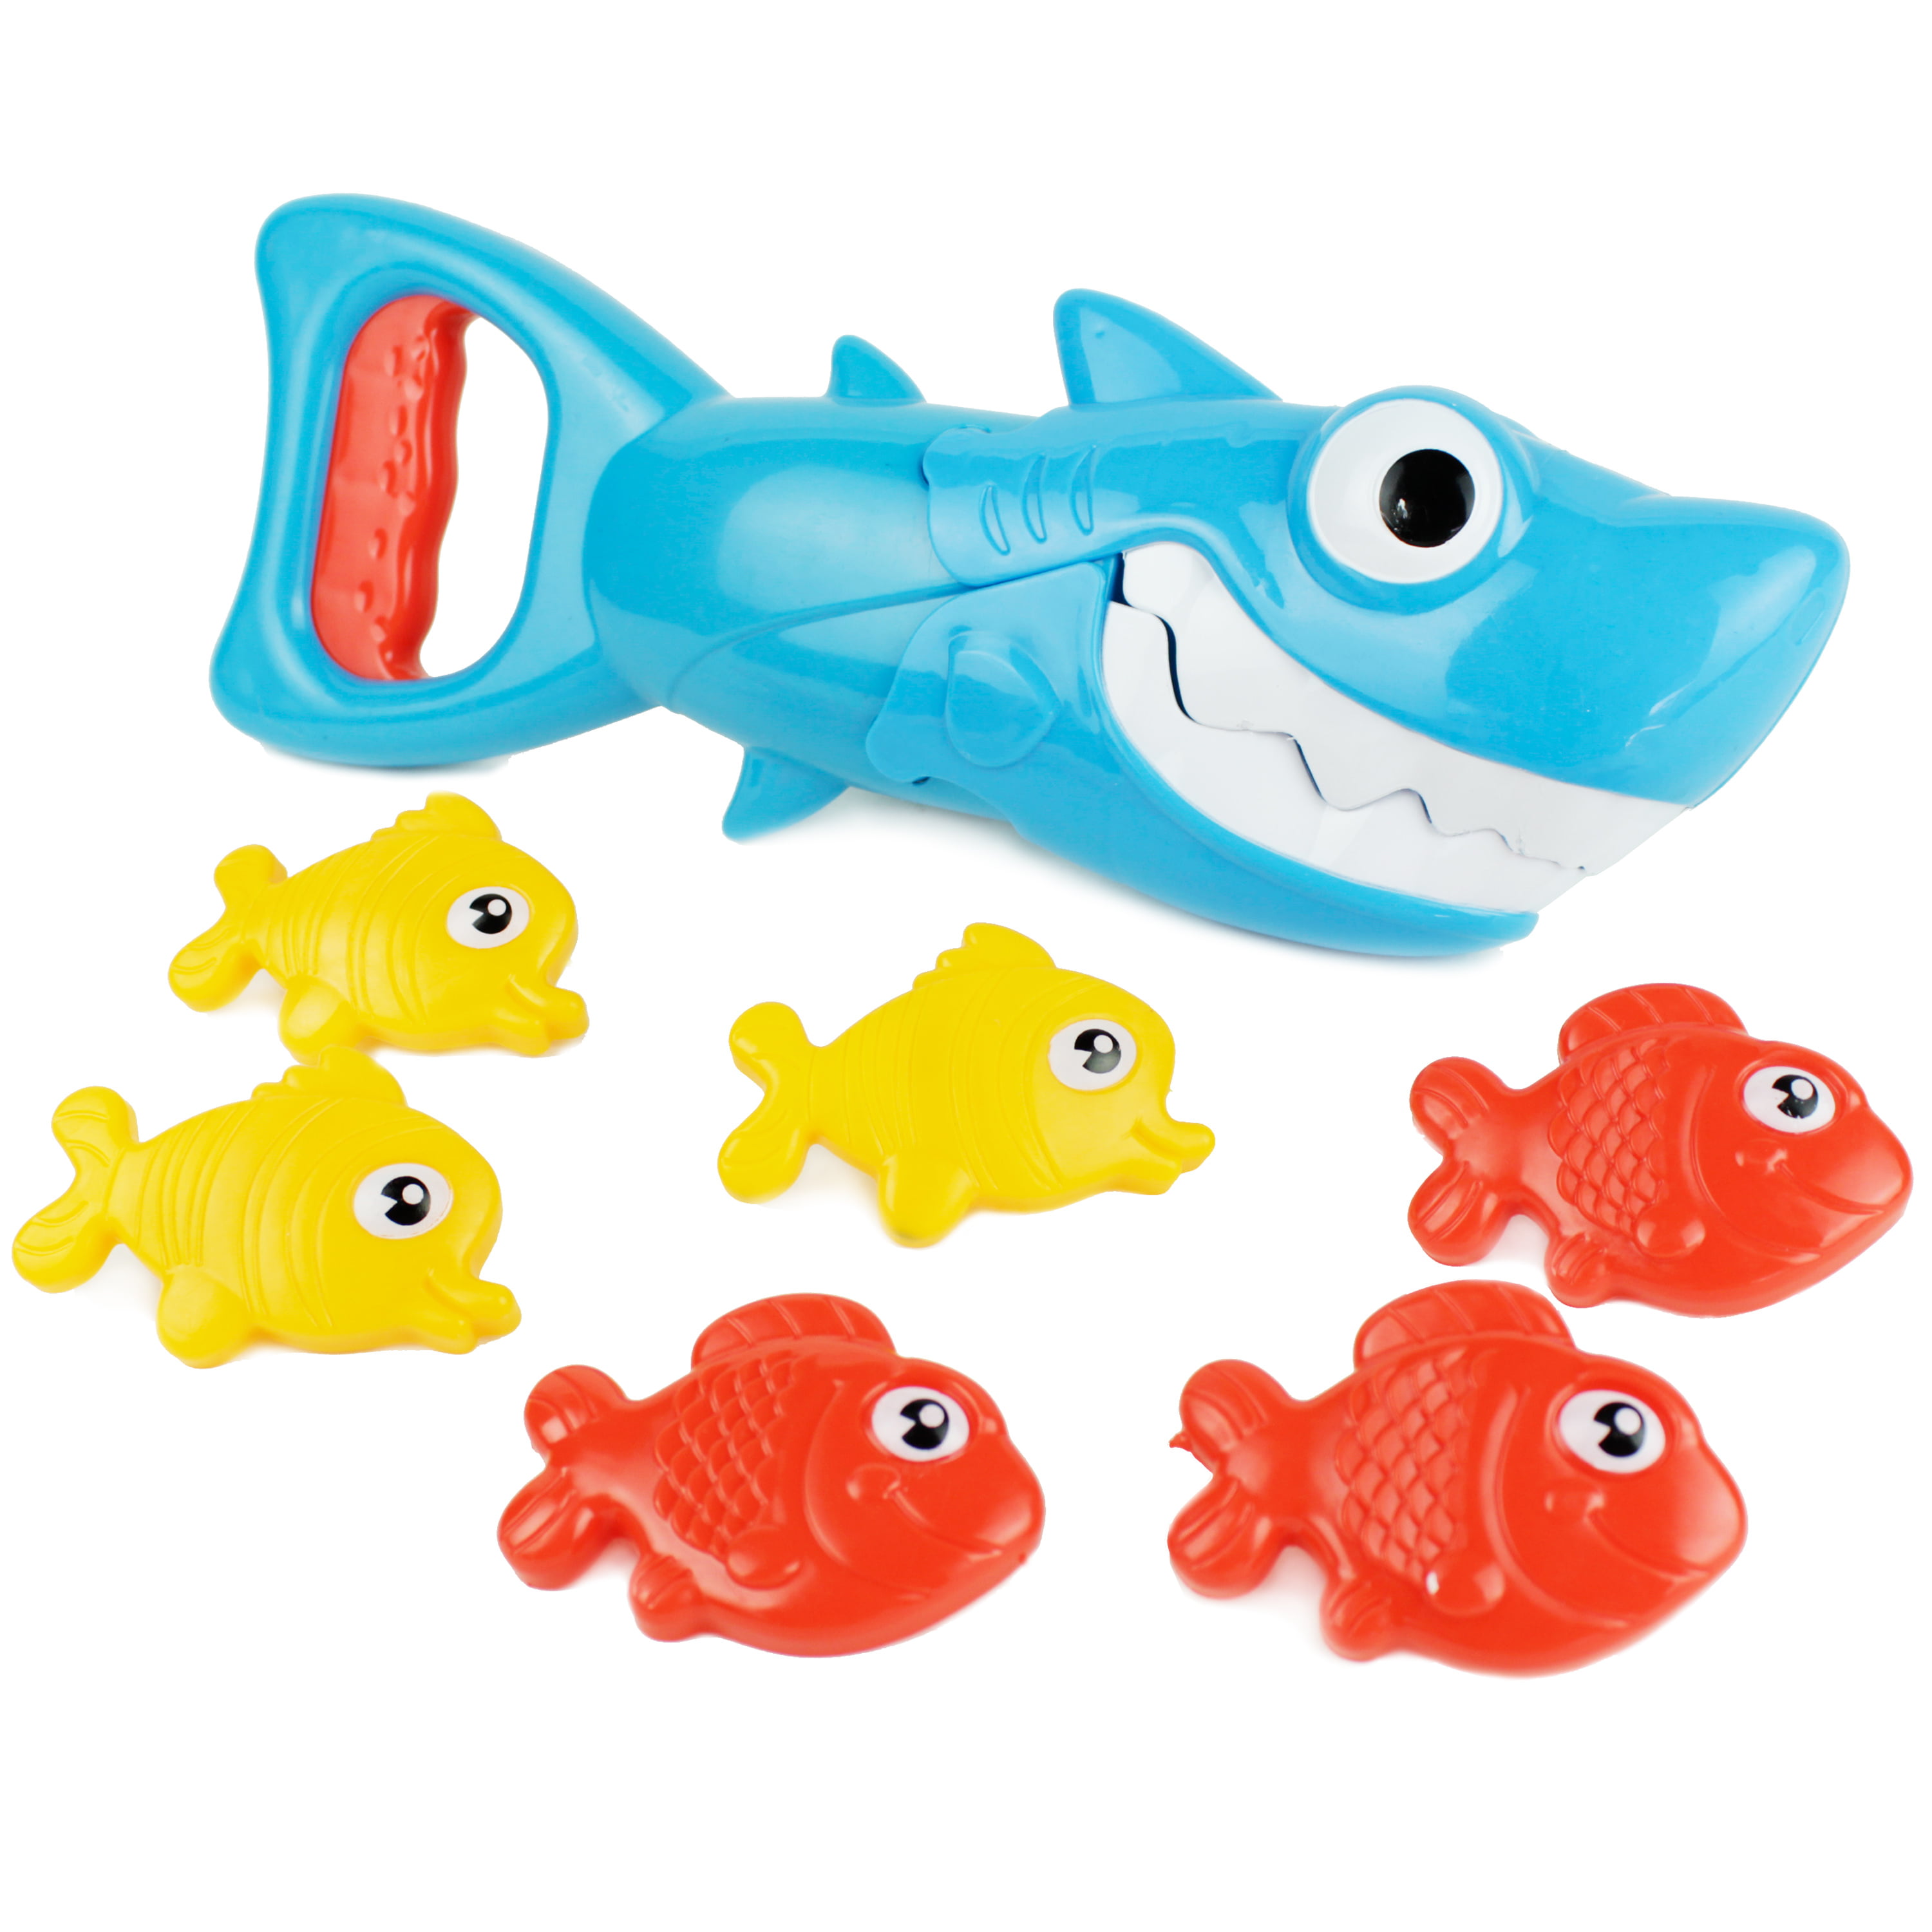 Boley Shark Grabber Bath Toy Game for Kids Great White Shark with Teeth Biting Action Includes 6 Sinking Fish